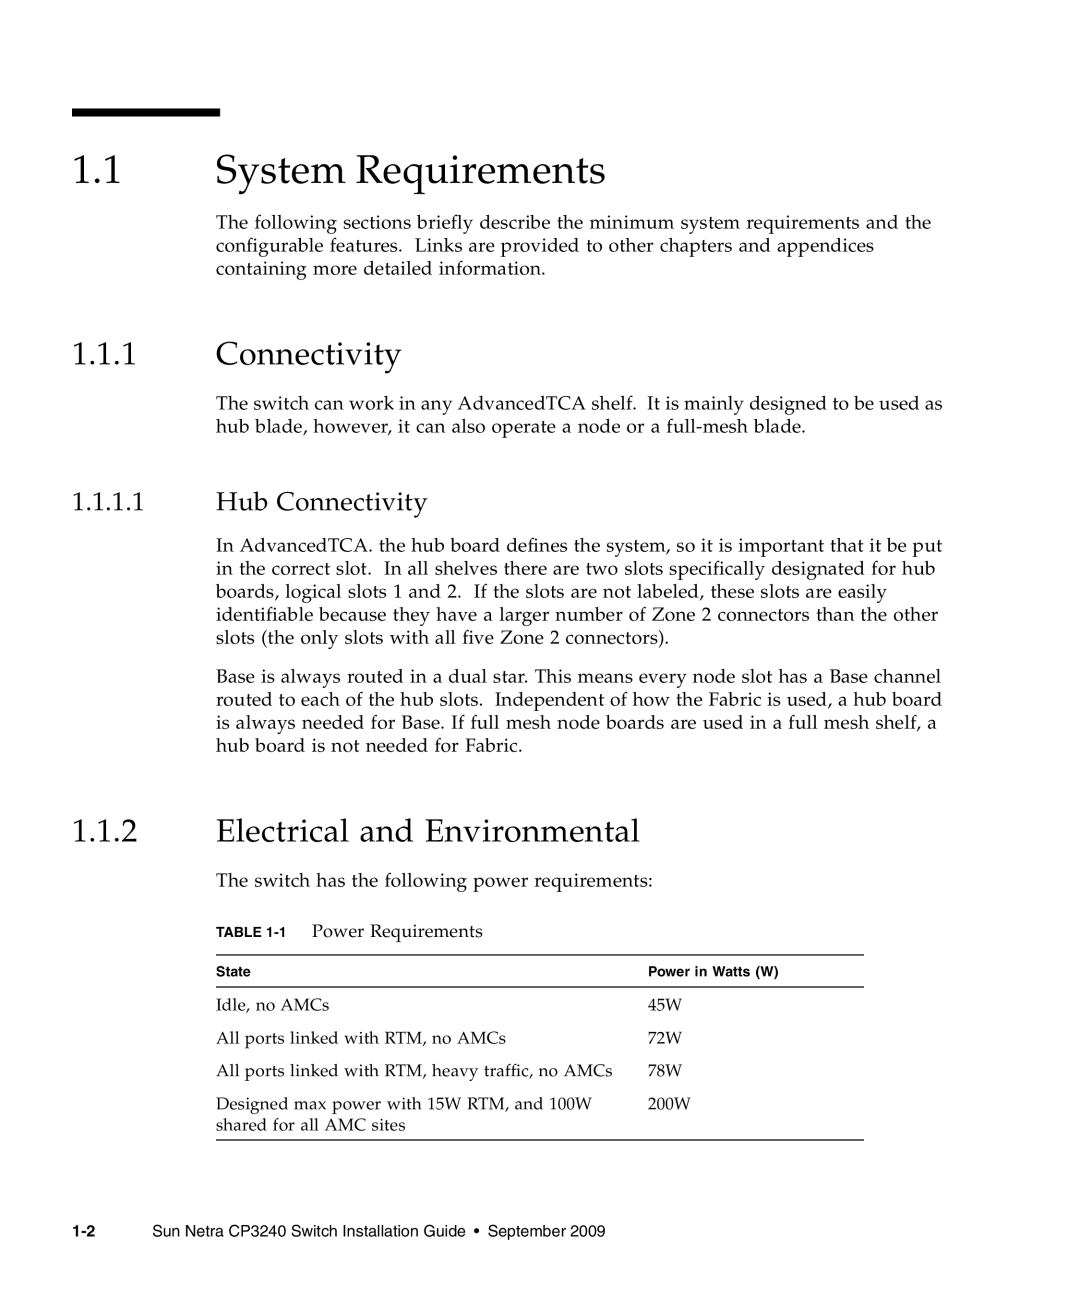 Sun Microsystems CP3240 manual System Requirements, Electrical and Environmental, Hub Connectivity 